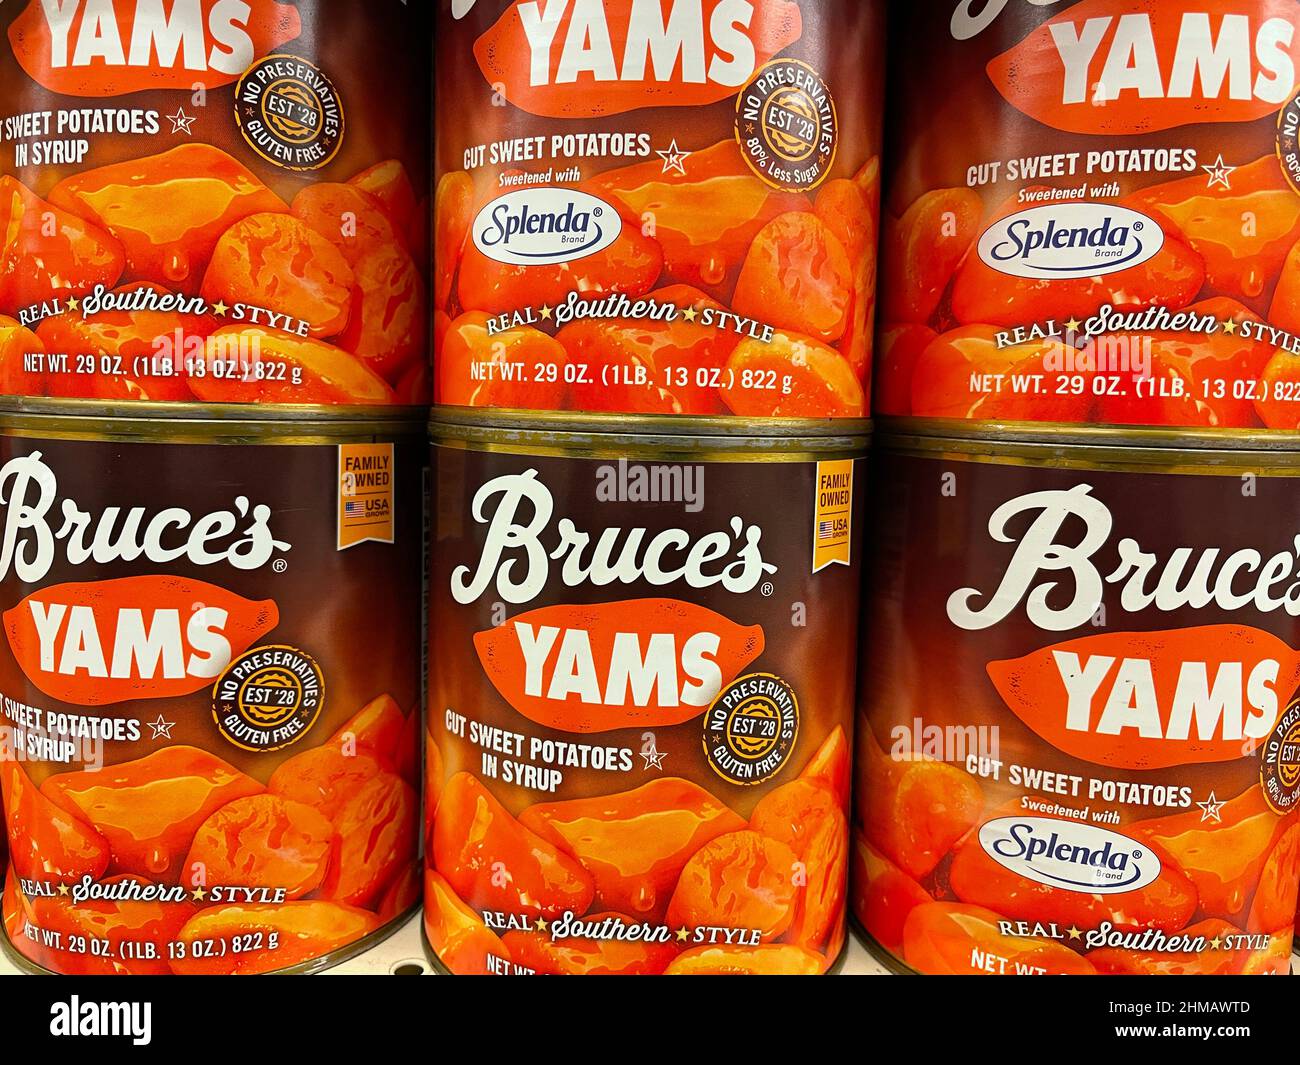 Grovetown, Ga USA - 01 01 22: Retail Grocery store shelves Bruces yams front facing Stock Photo